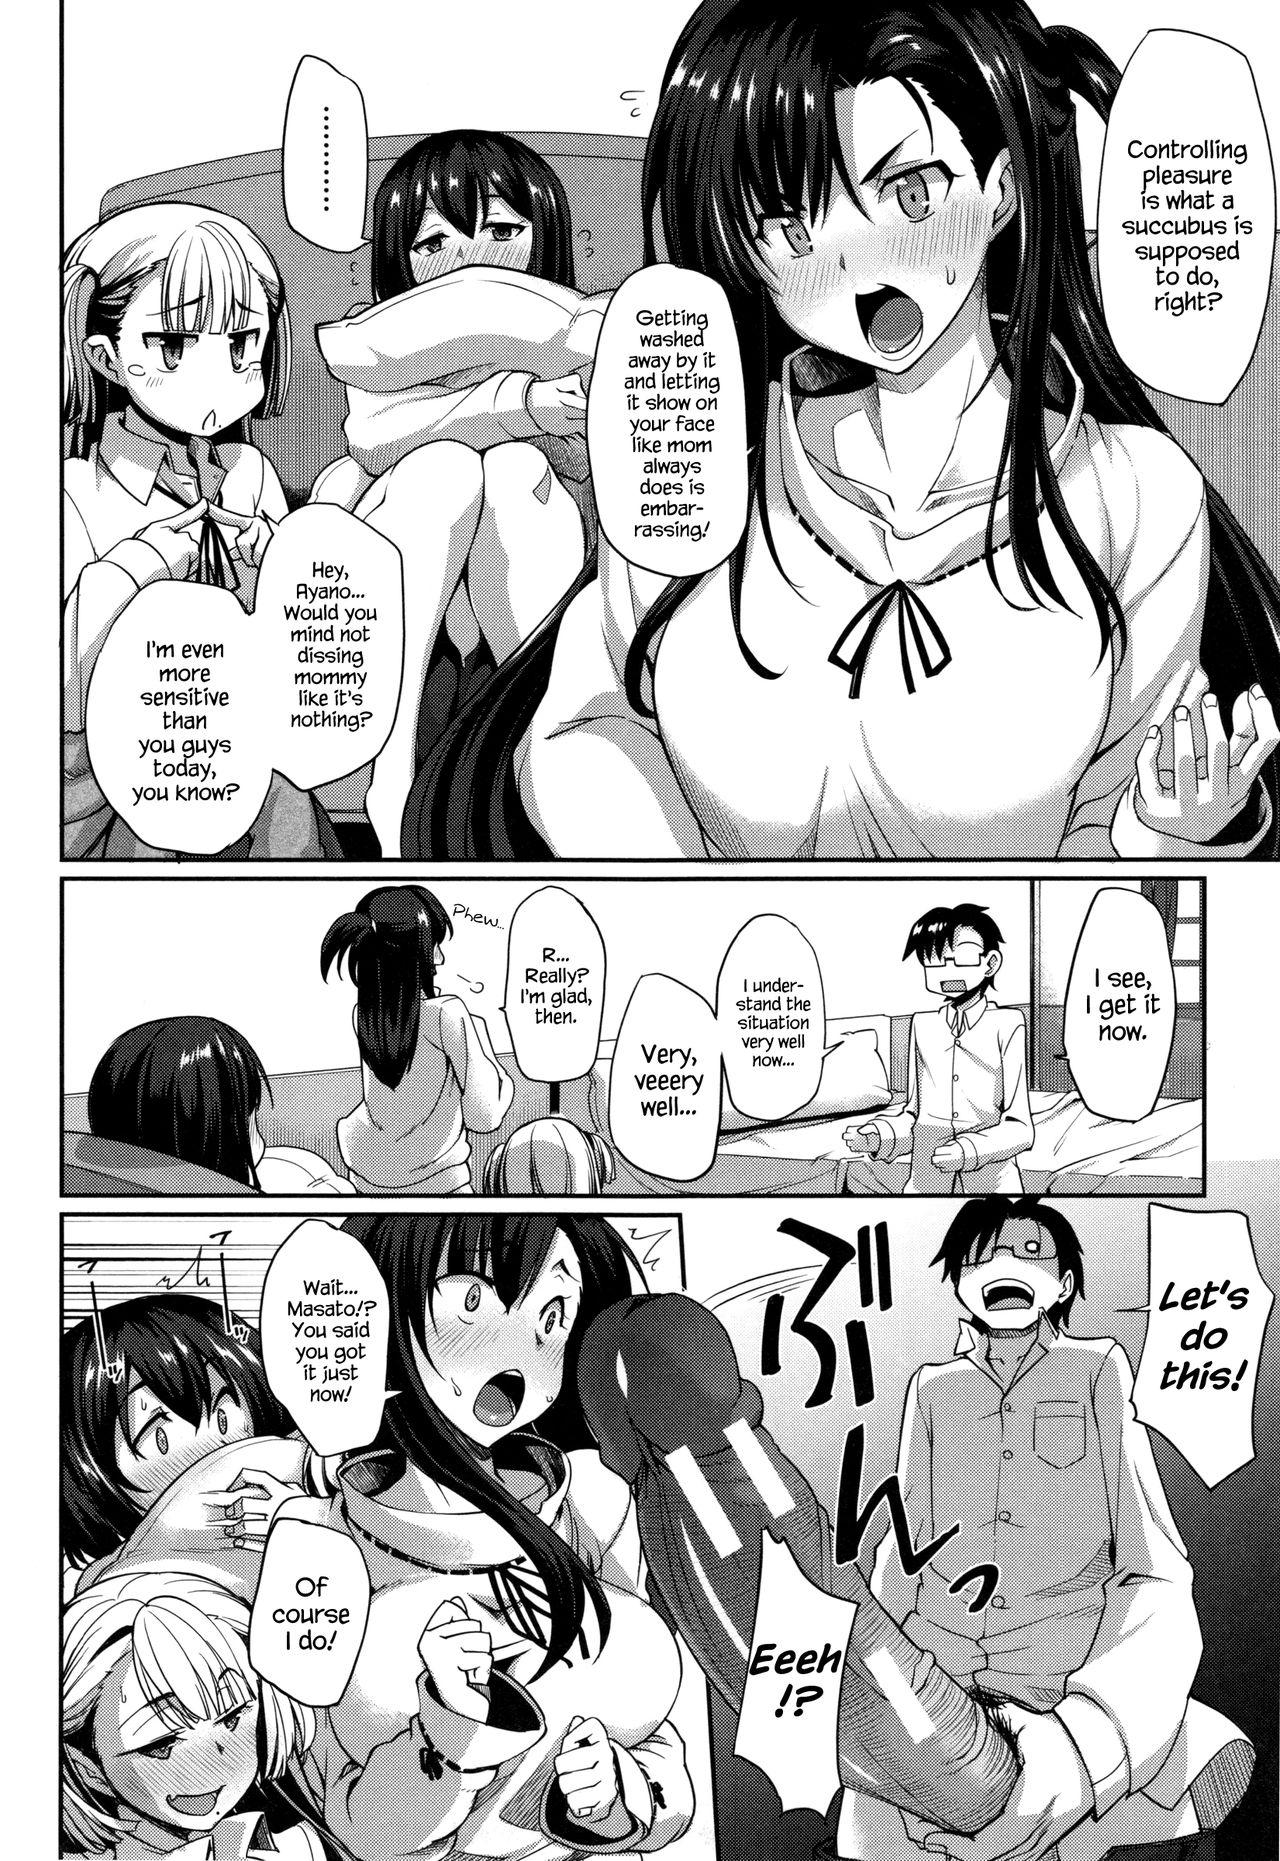 Best Blowjob Inma no Mikata! | Succubi’s Supporter! Ch. 6 Dance - Page 4